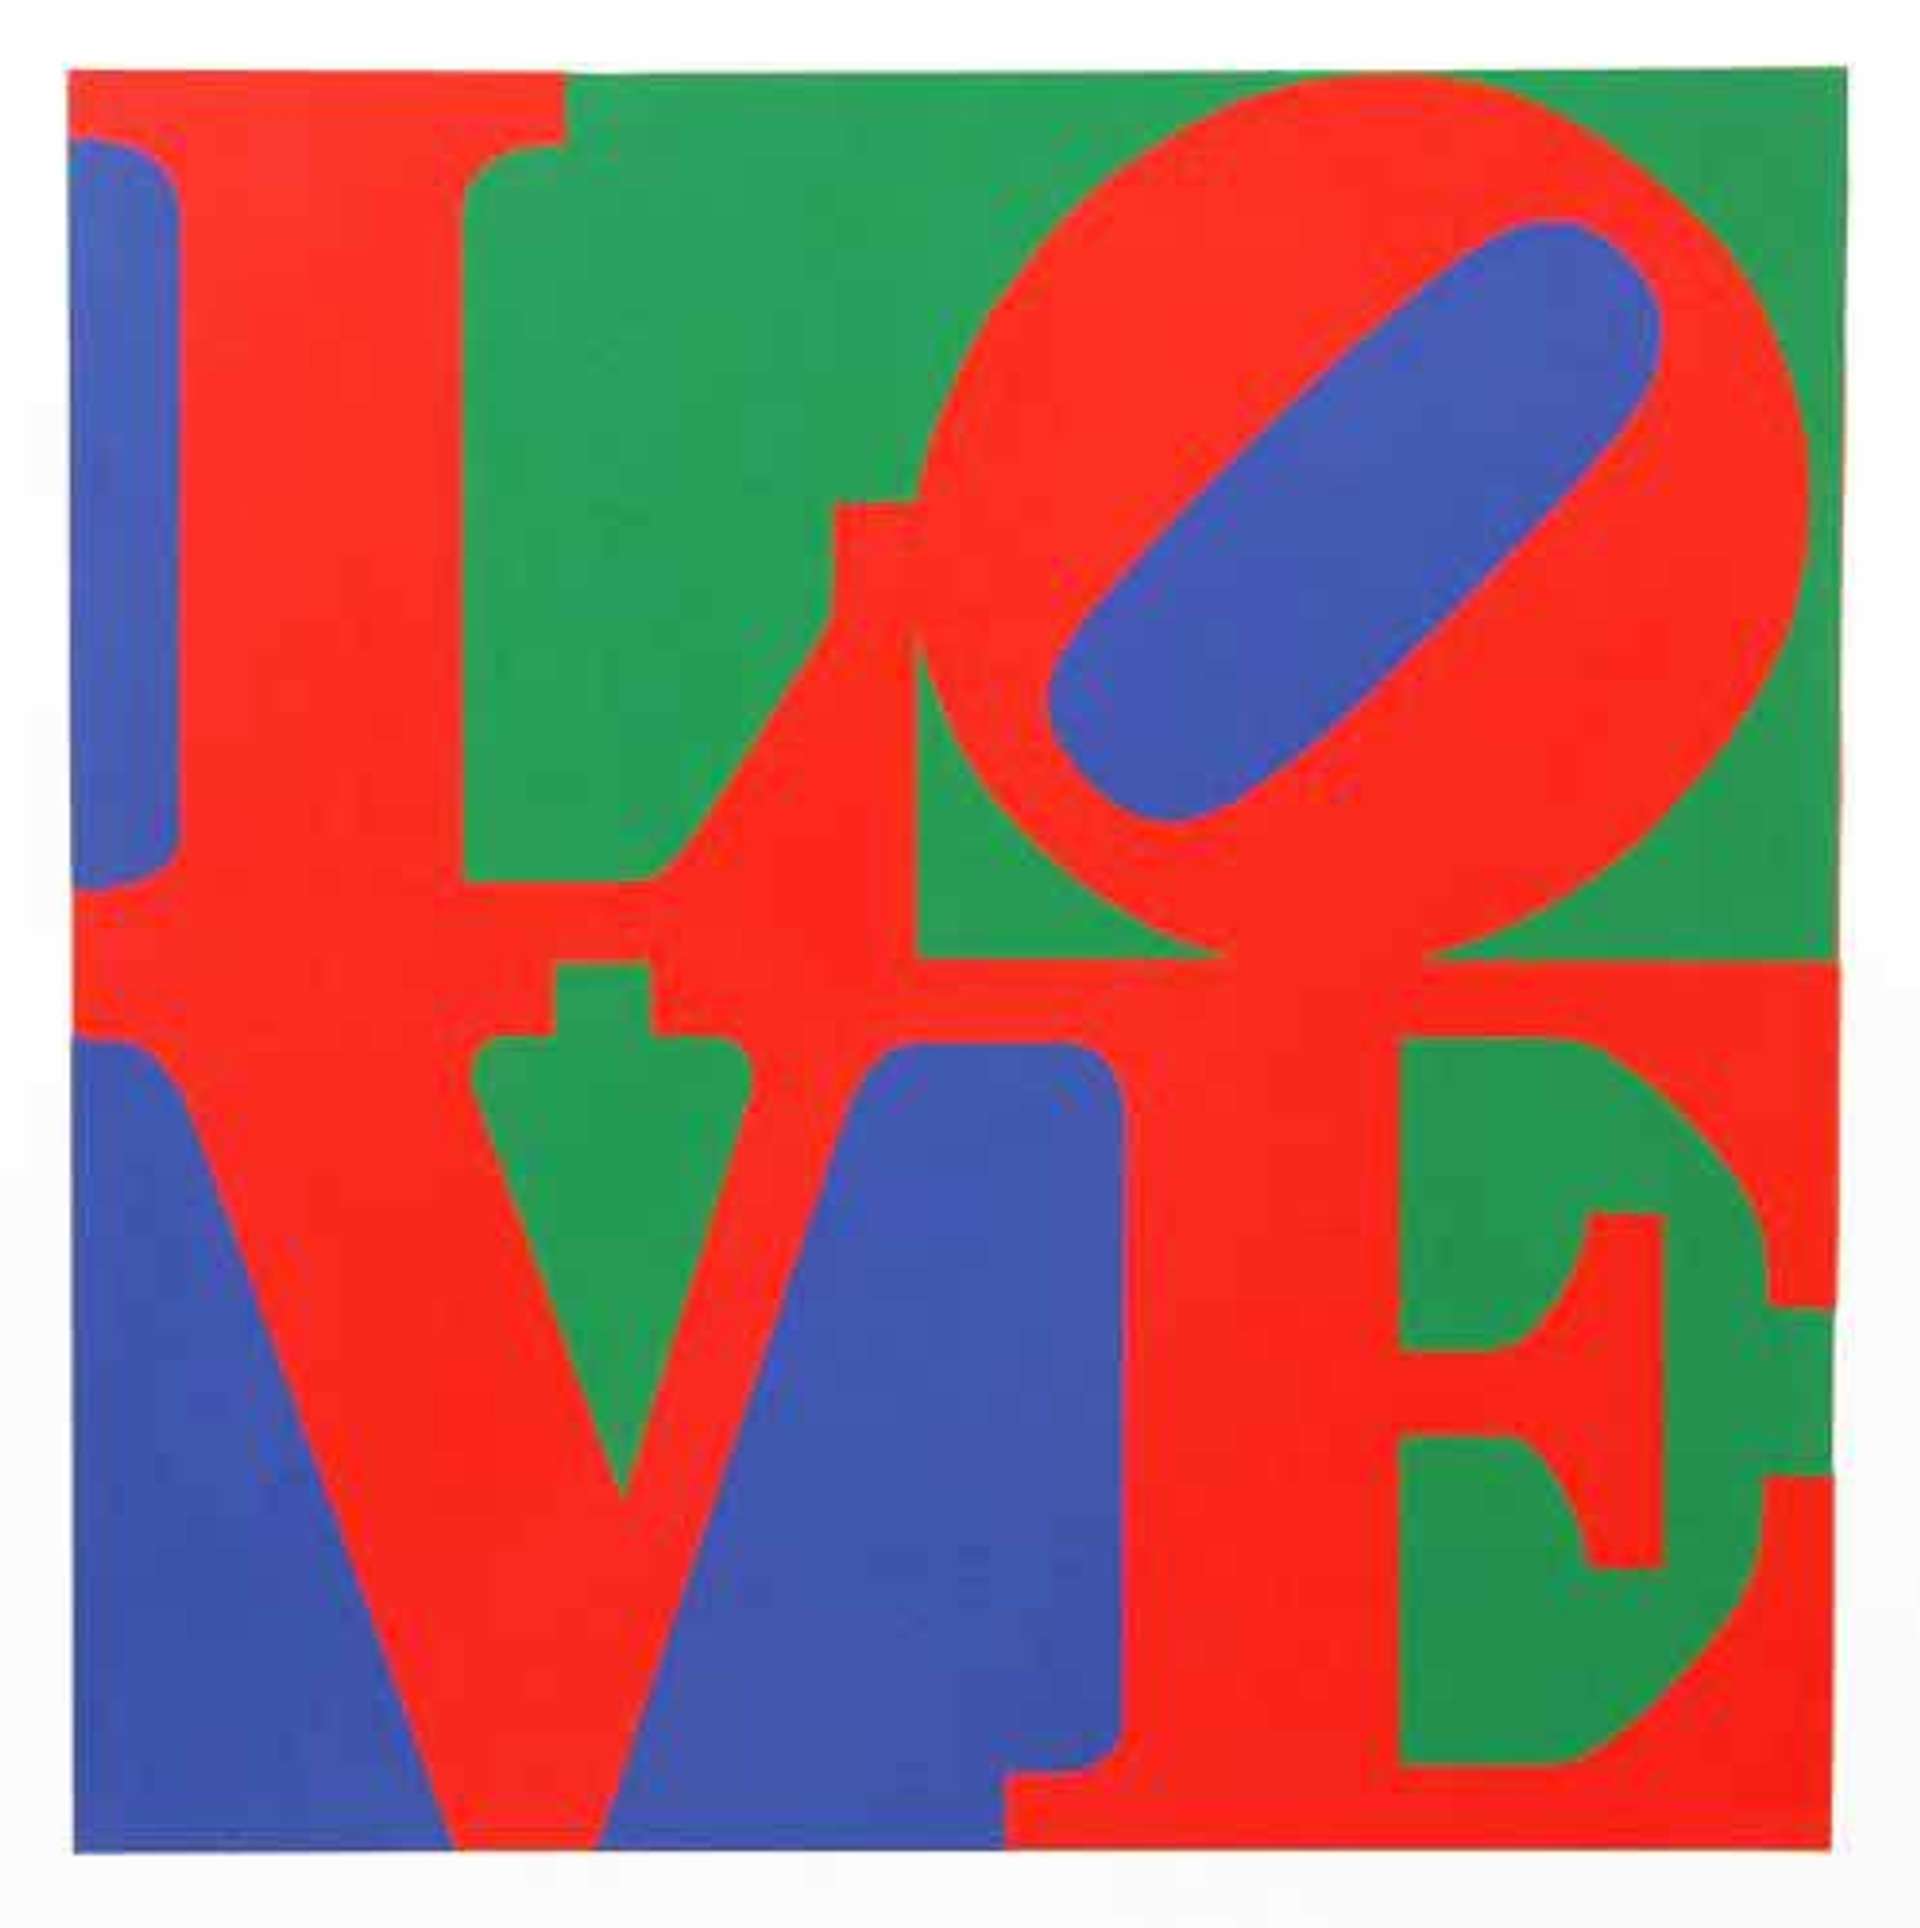 The Book Of Love (red, blue and green) - Signed Print by Robert Indiana 1996 - MyArtBroker